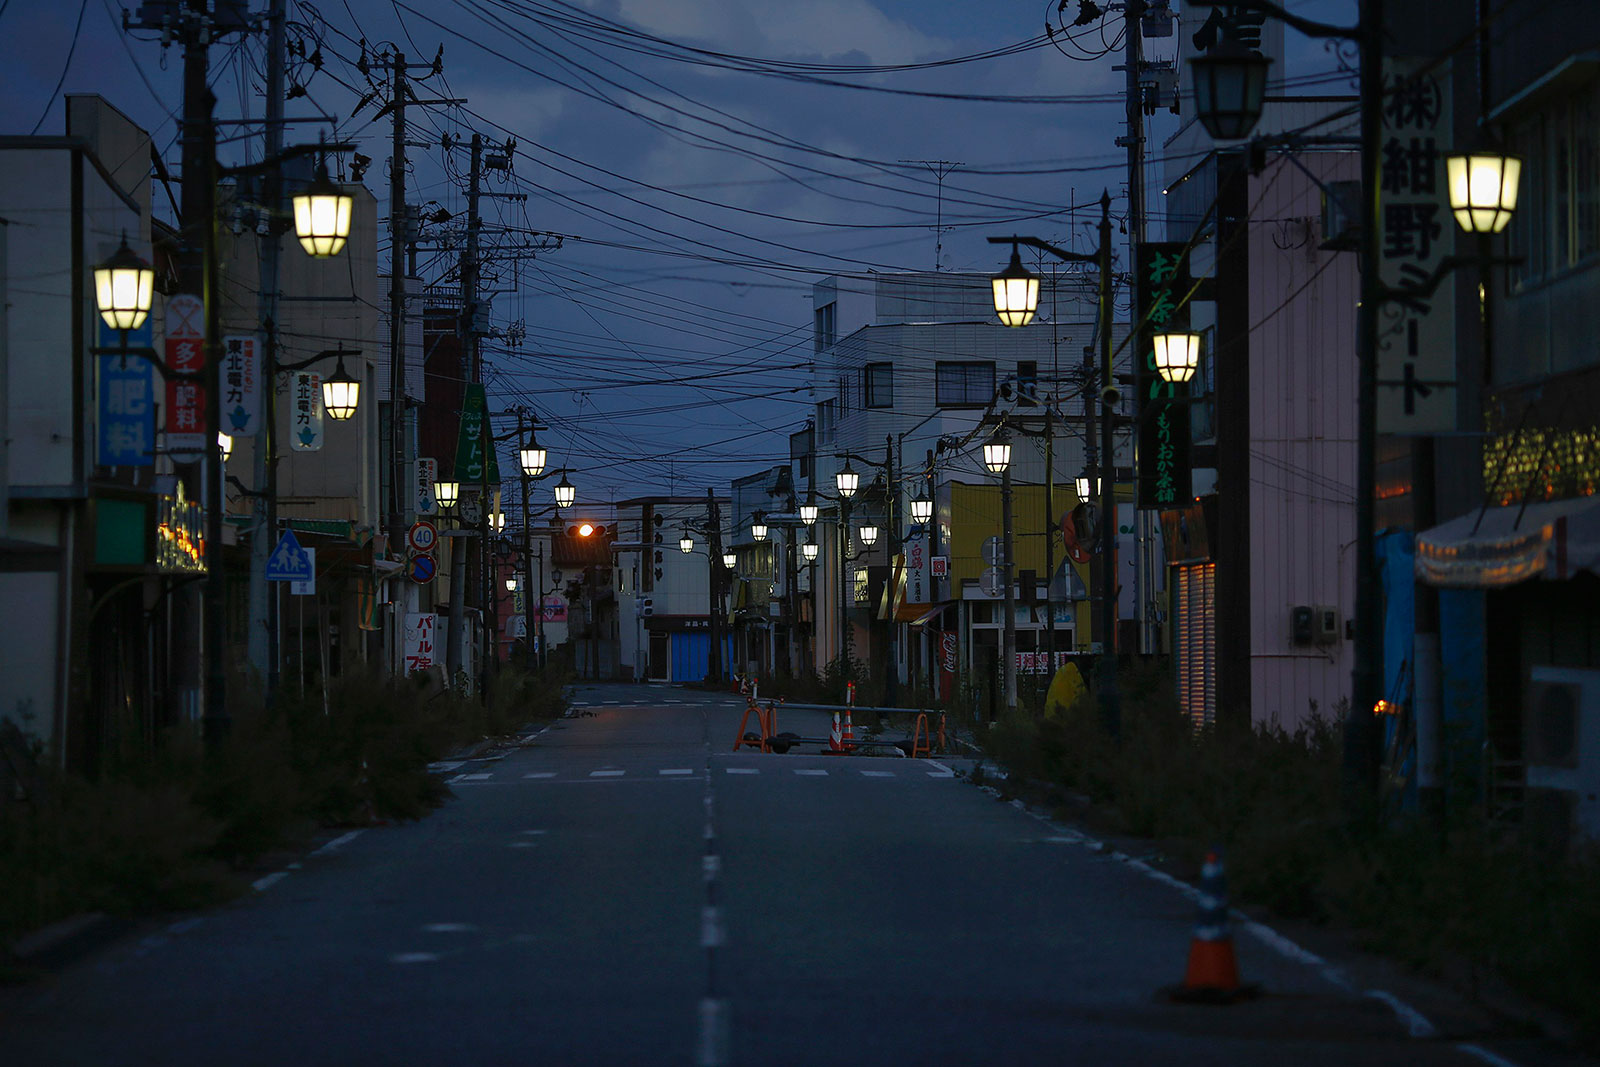 20,000 people used to live here, now it's a ghost town. This is Namie, Japan, now inside the nuclear Exclusion Zone created by the Fukushima disaster. The lights are left on to maintain hope of eventually returning to the town.